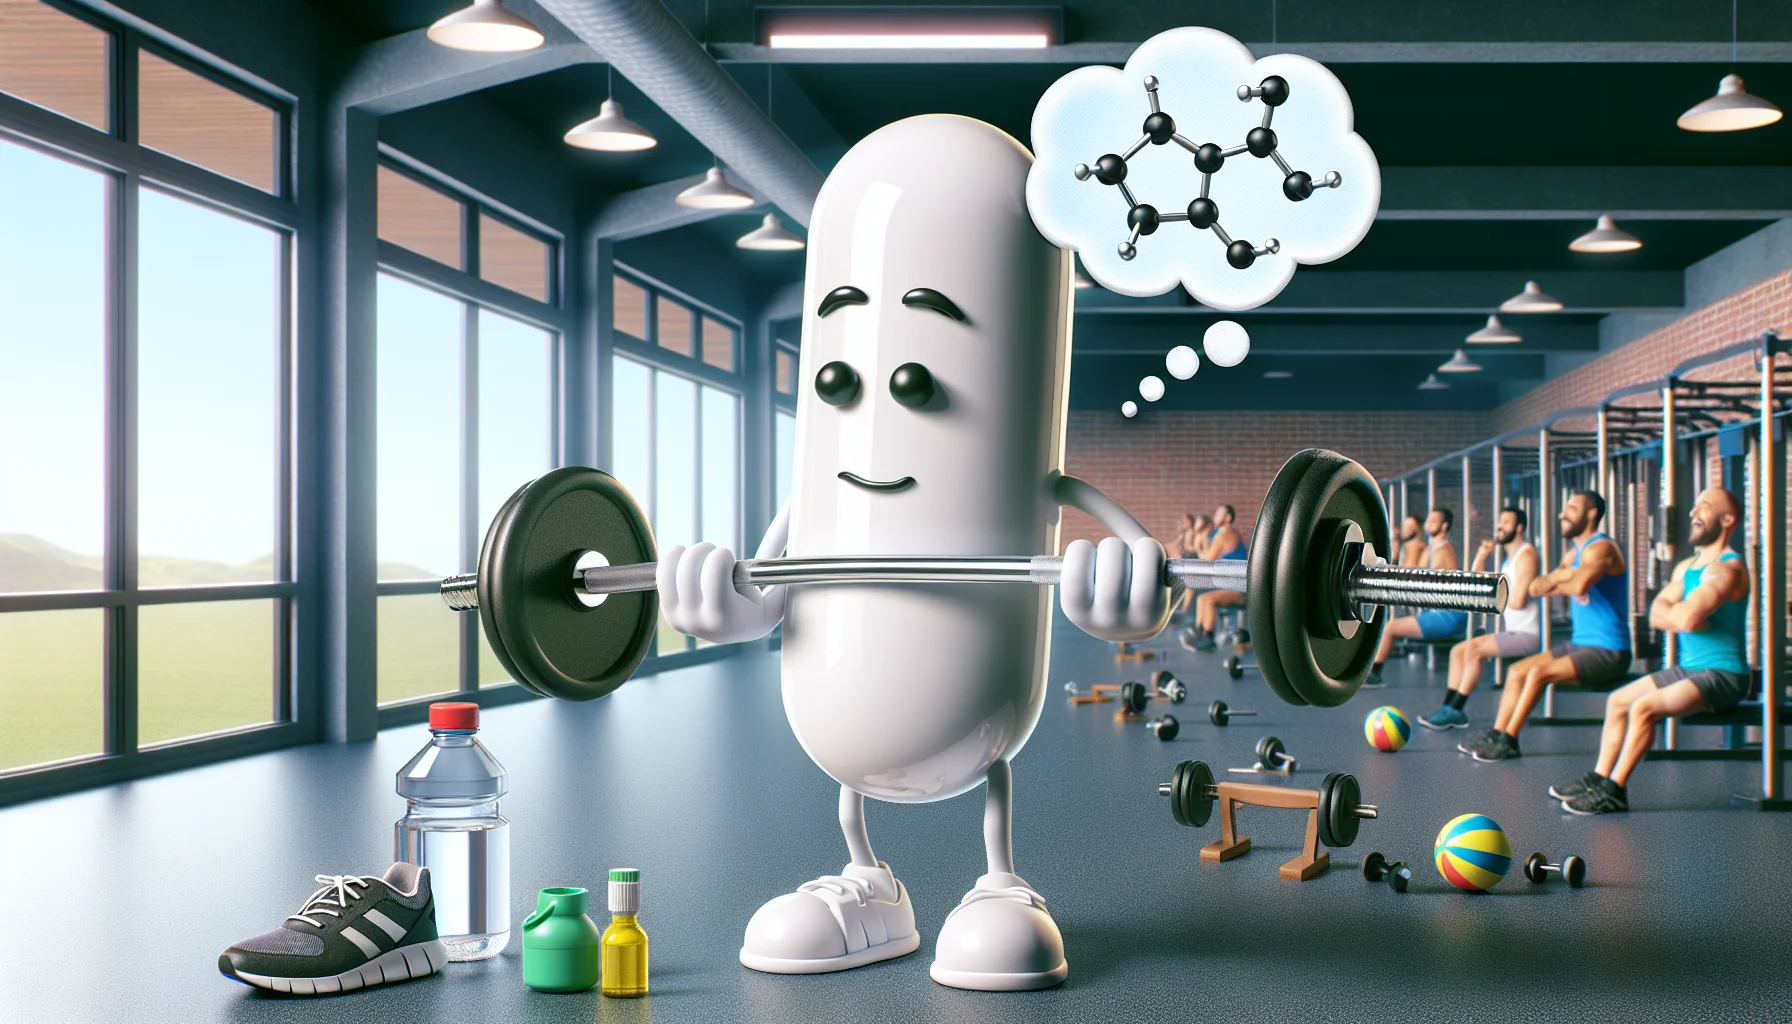 Create a humorous and realistic image illustrating the concept of chelated magnesium as a dietary supplement. Picture a magnesium pill with cartoonish arms and legs, lifting a miniaturized barbell to show its benefits for sports performance. Around it, there should be sports-related accessories like a water bottle and running shoes. Add a thought bubble with the molecular structure of chelated magnesium, showing that it's thinking 'fitness'. The background can be the interior of a gym with people of various descents and genders working out and marveling at the pill's effort. 